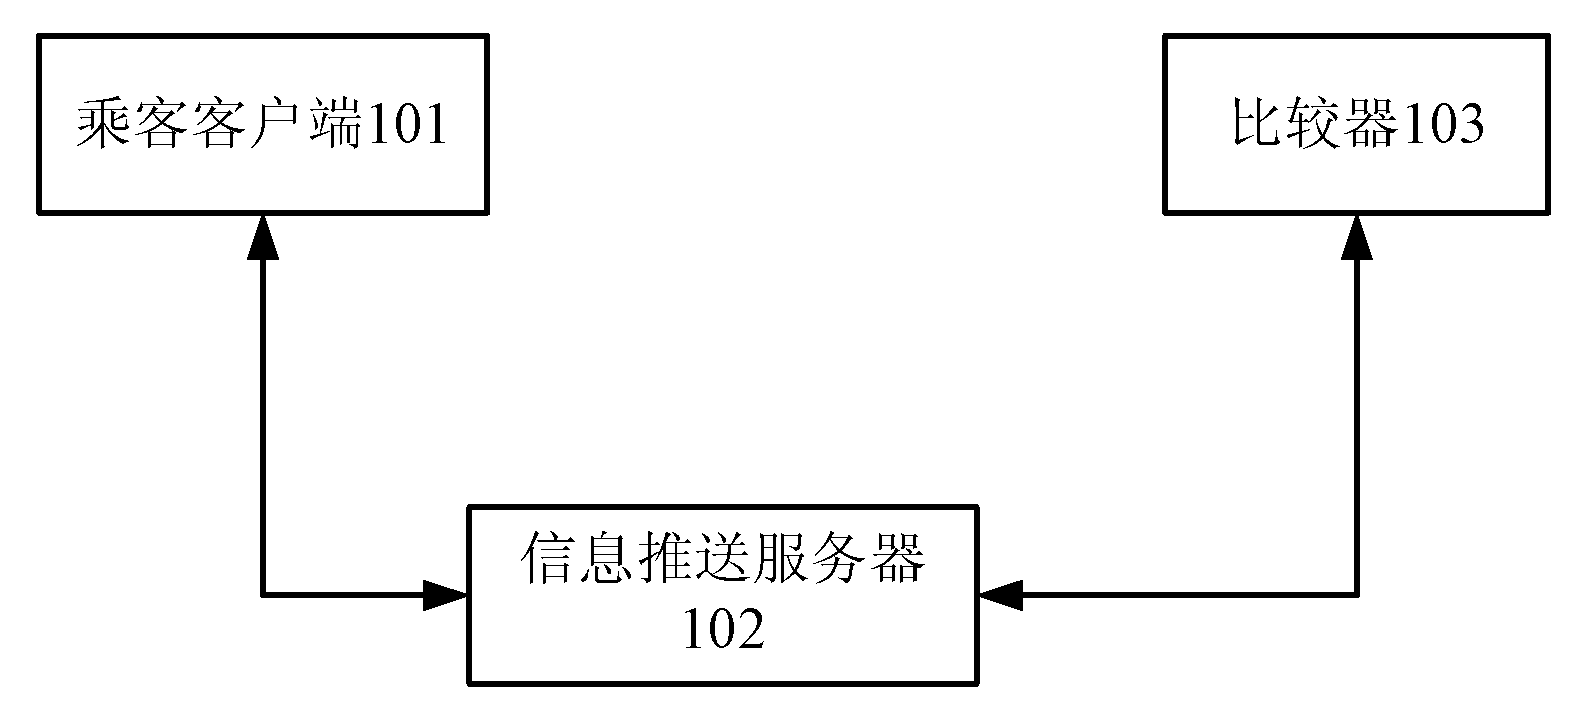 Method and system for taxi information interaction